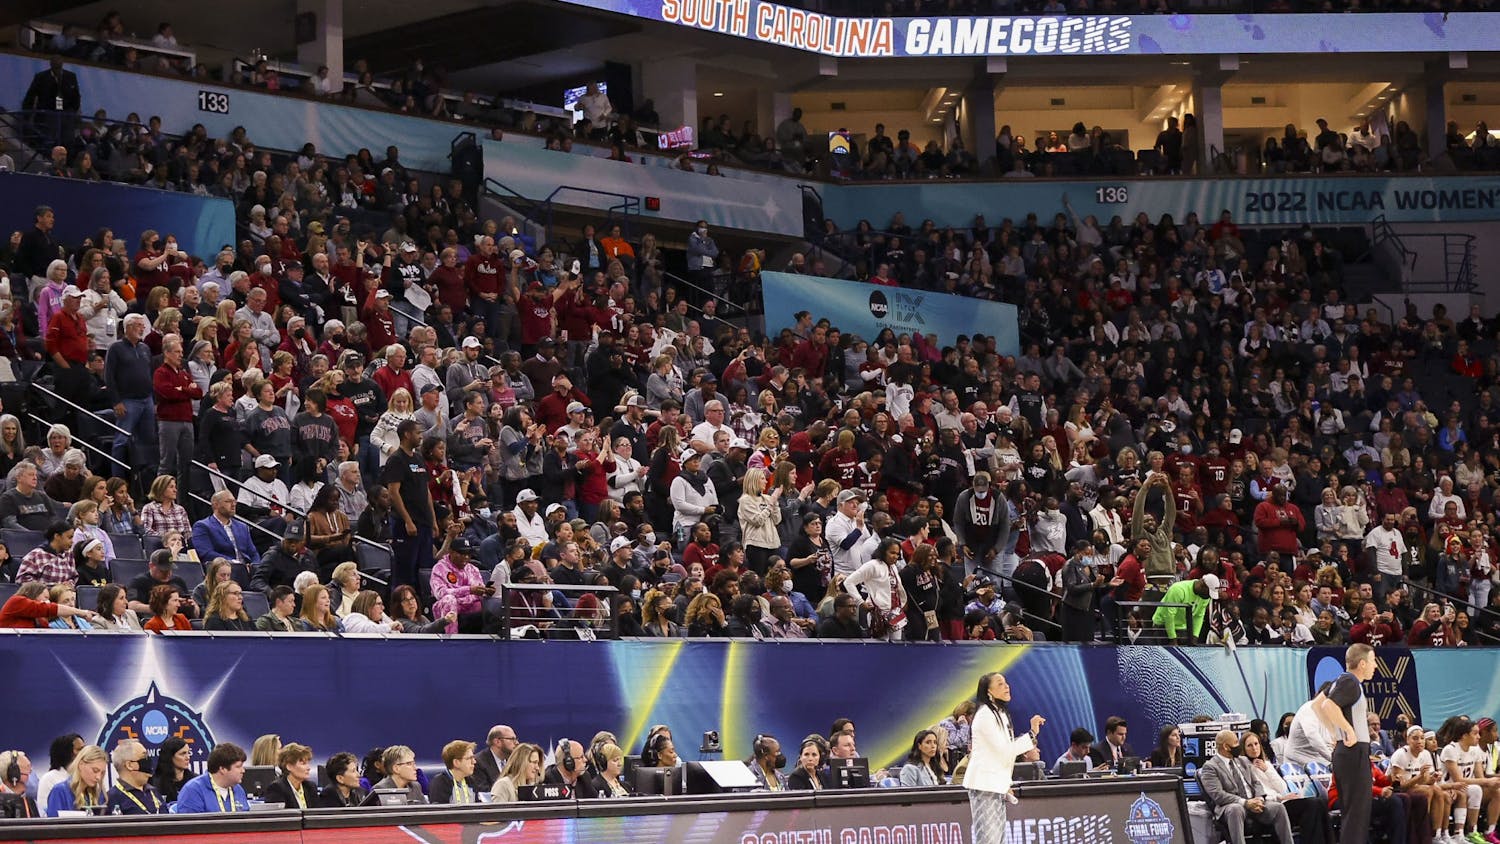 South Carolina fans filled the section behind the Gamecocks bench during South Carolina's 72-59 victory over Louisville on April 1, 2022. South Carolina advanced to play in the national championship game with the win.